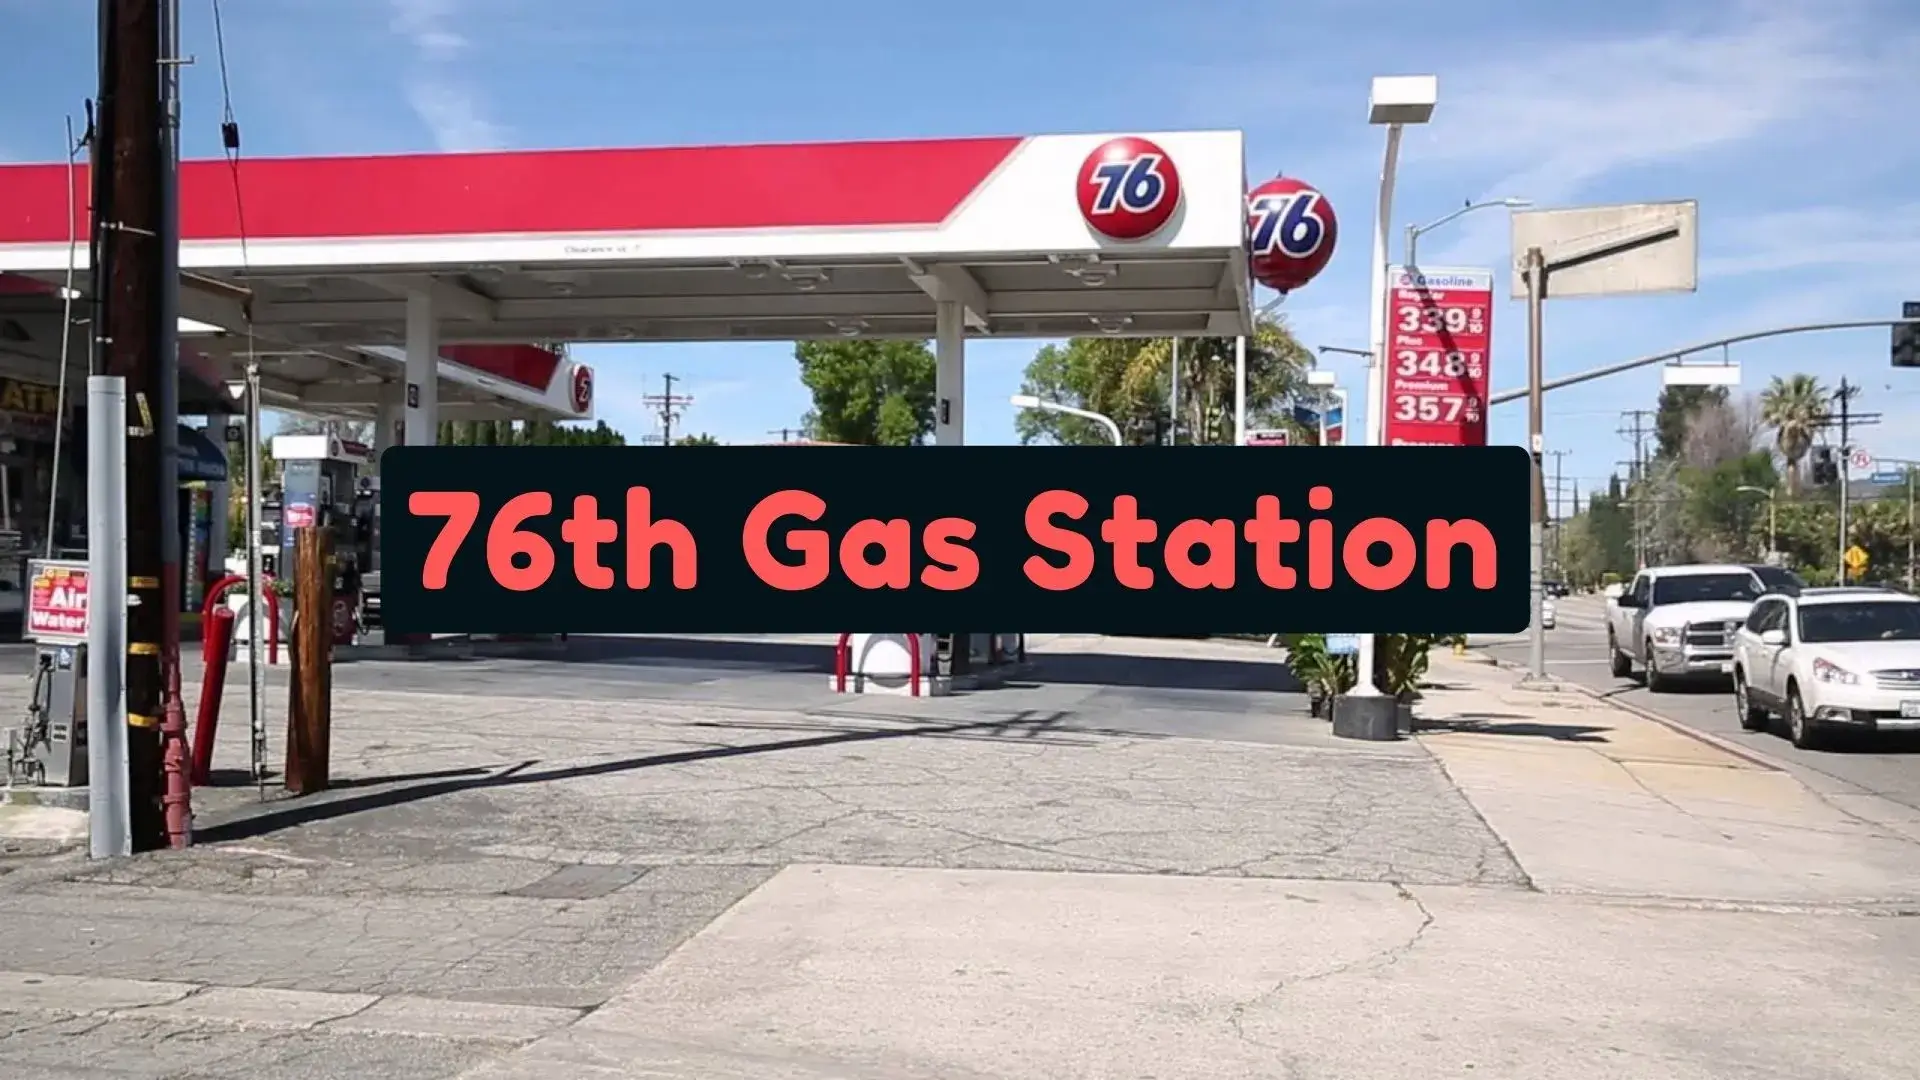 Looking for 76 Gas Station near me? Find locations, hours, prices & rewards. Explore the benefits of using 76 Gas, top-tier quality, and more.